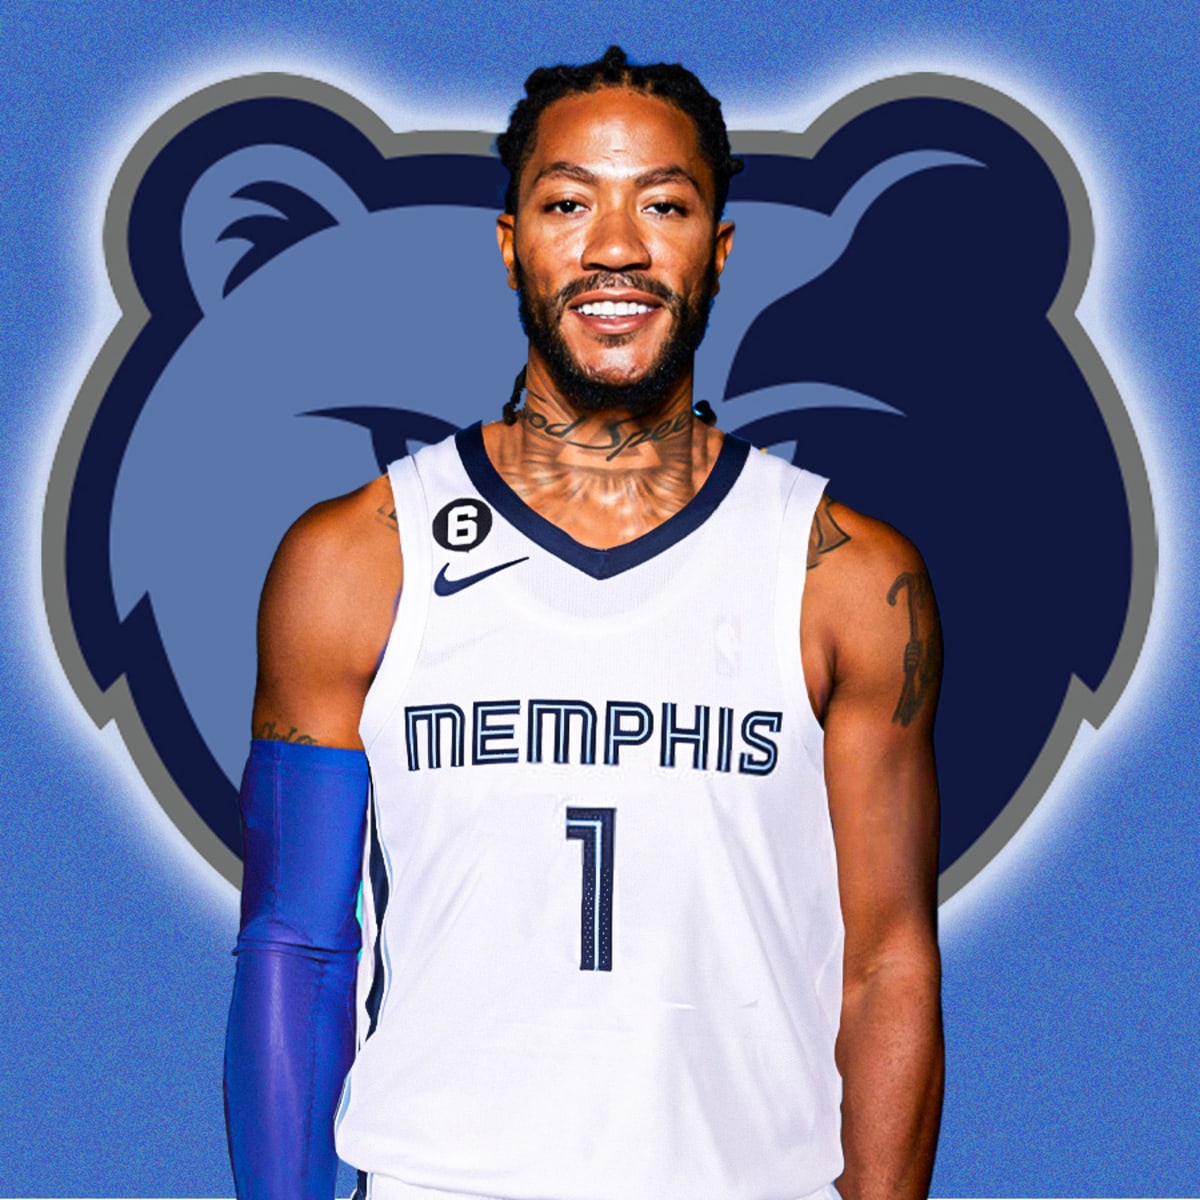 Derrick Rose to sign to Memphis Grizzlies